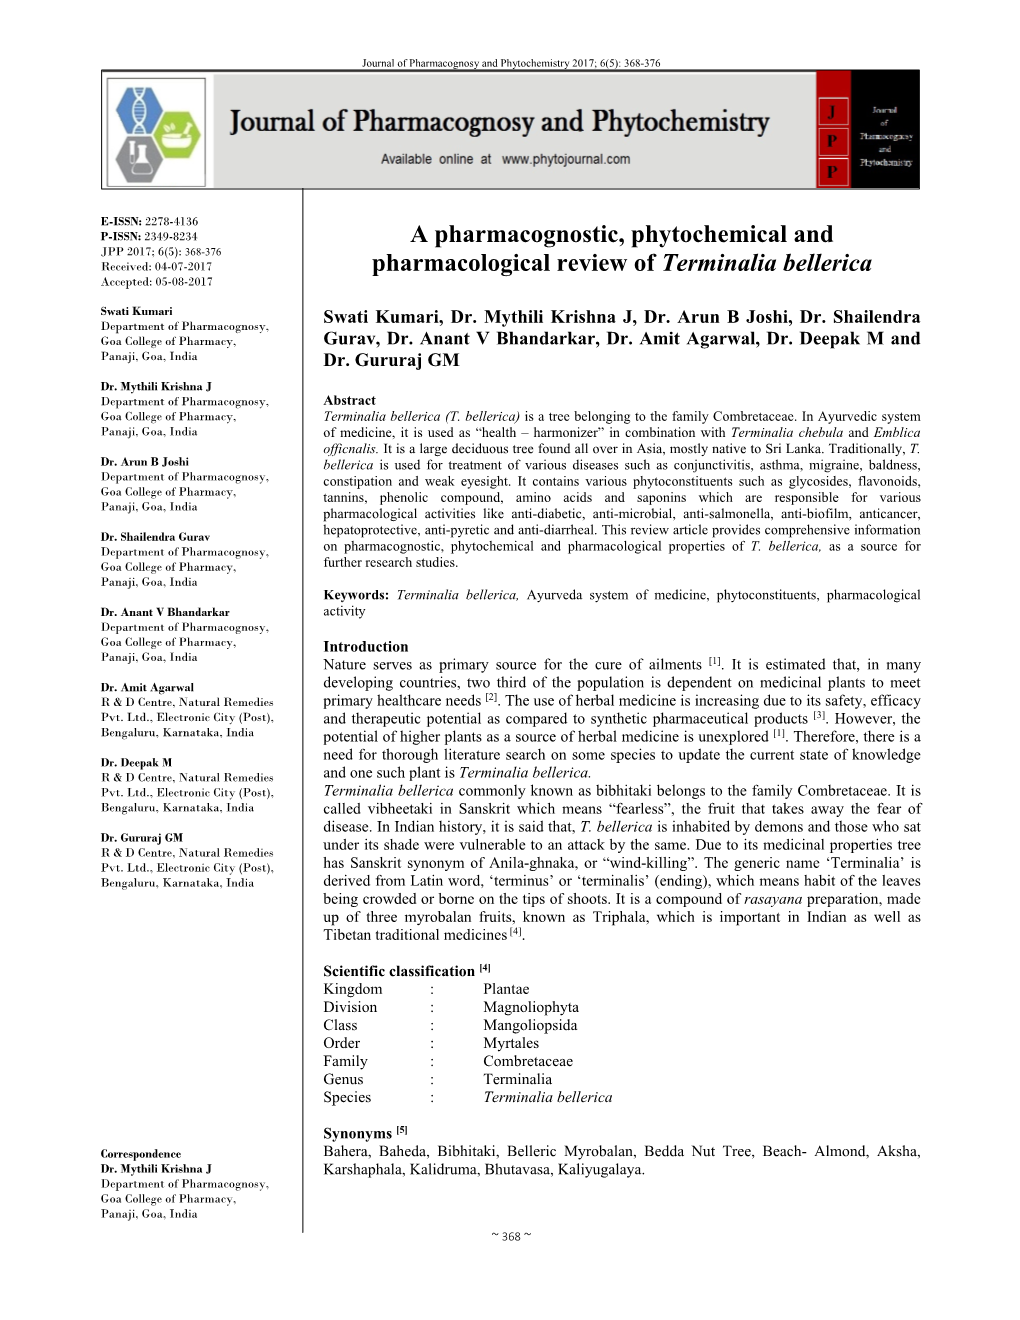 A Pharmacognostic, Phytochemical and Pharmacological Review Of